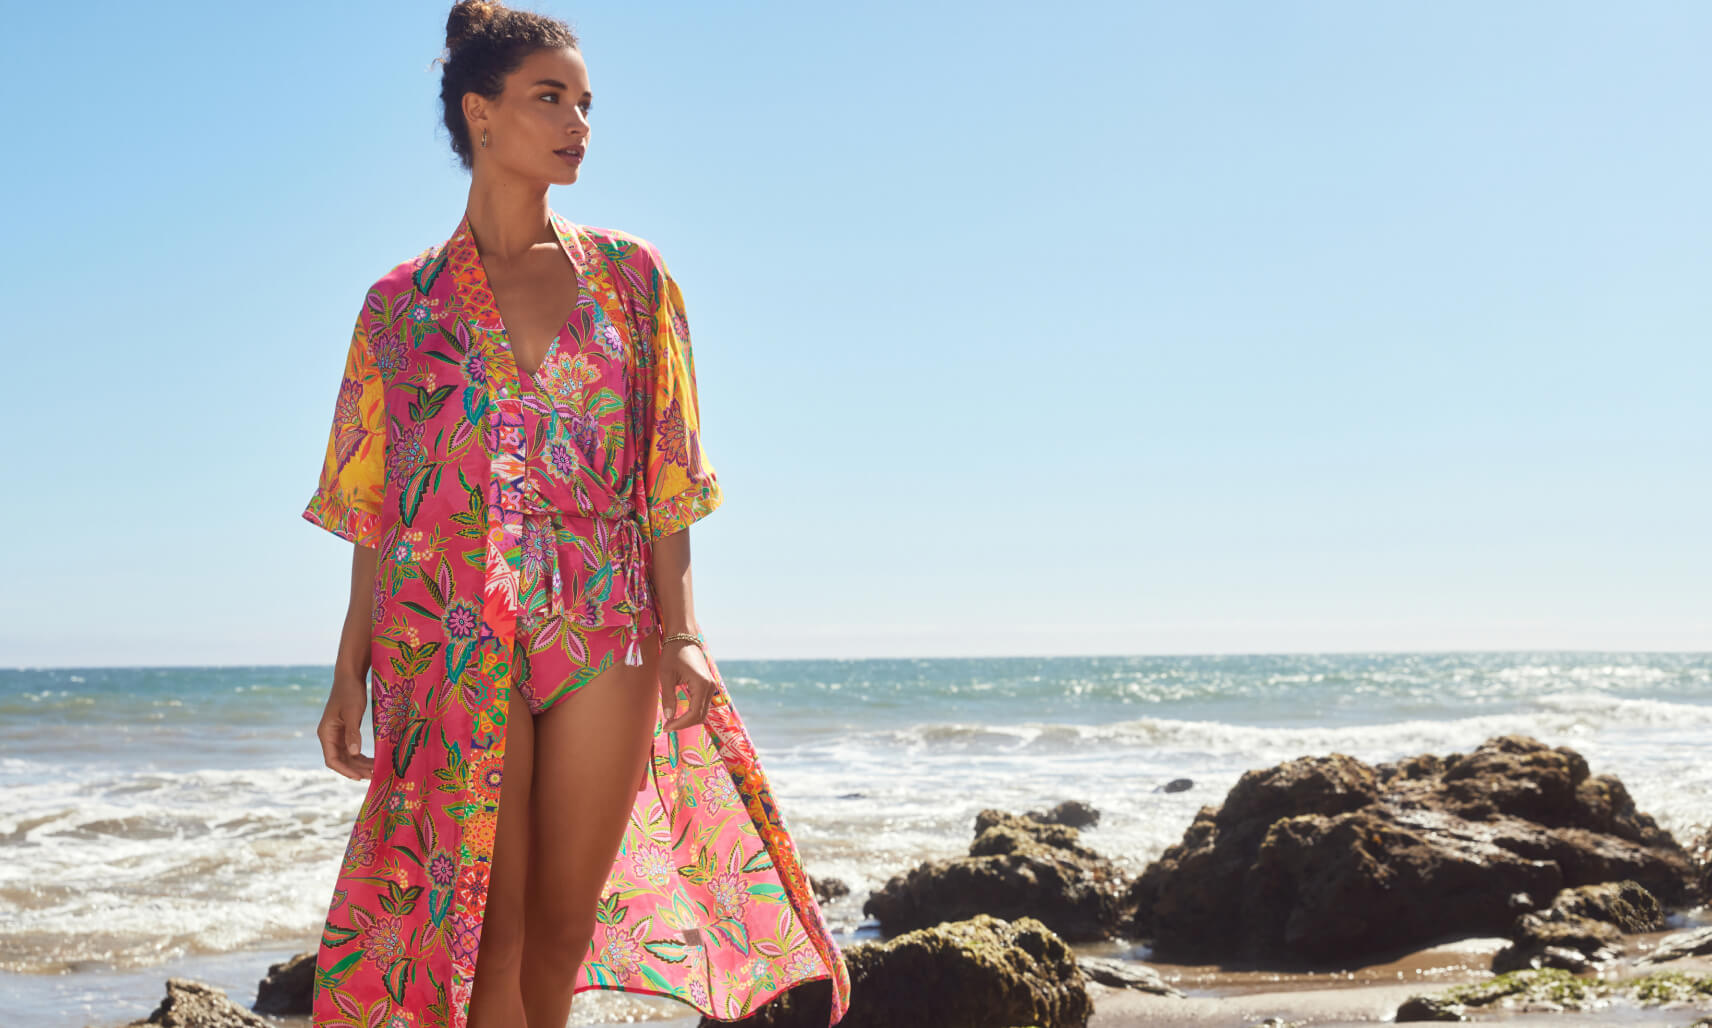 Model on a beach in a printed one-piece and cover-up kimono